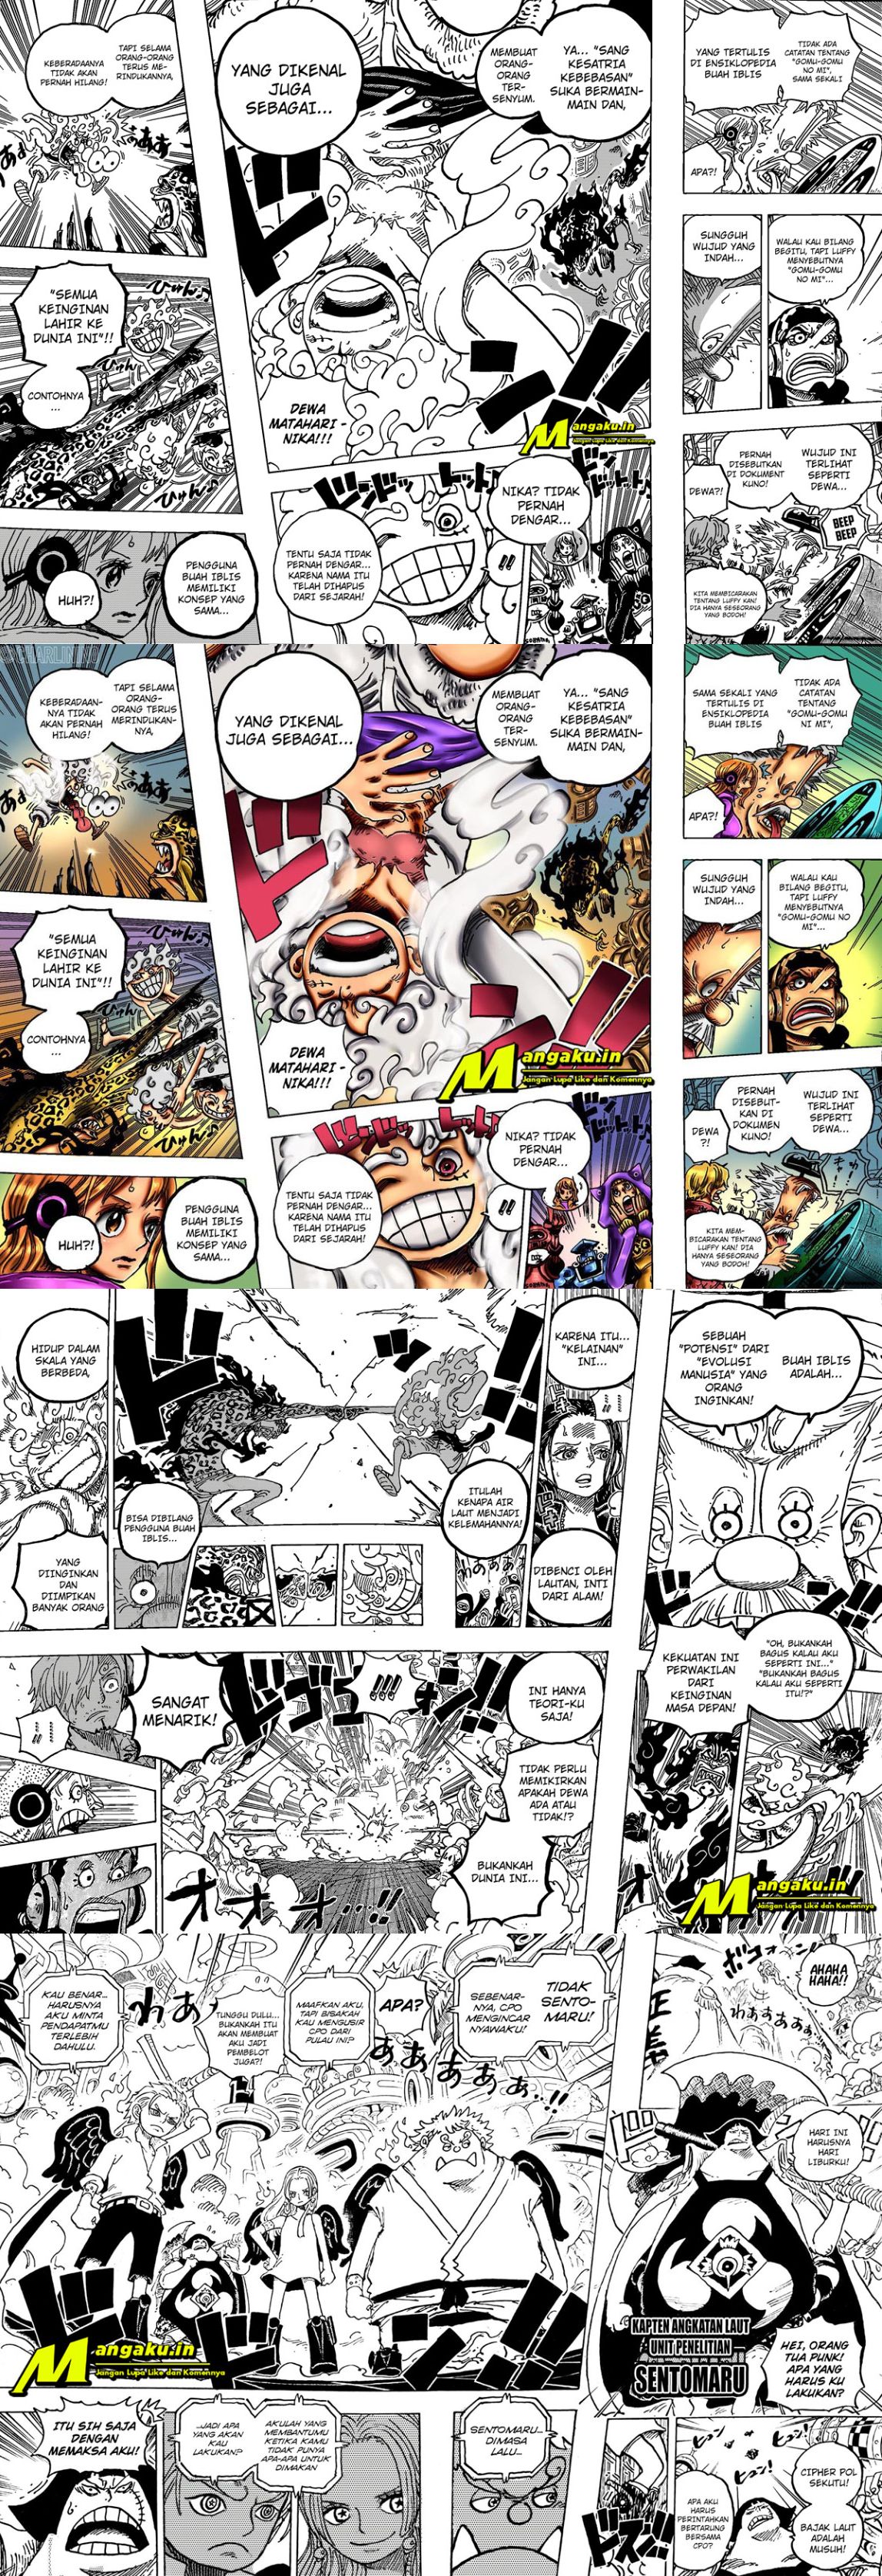 One Piece Chapter 1069 hq